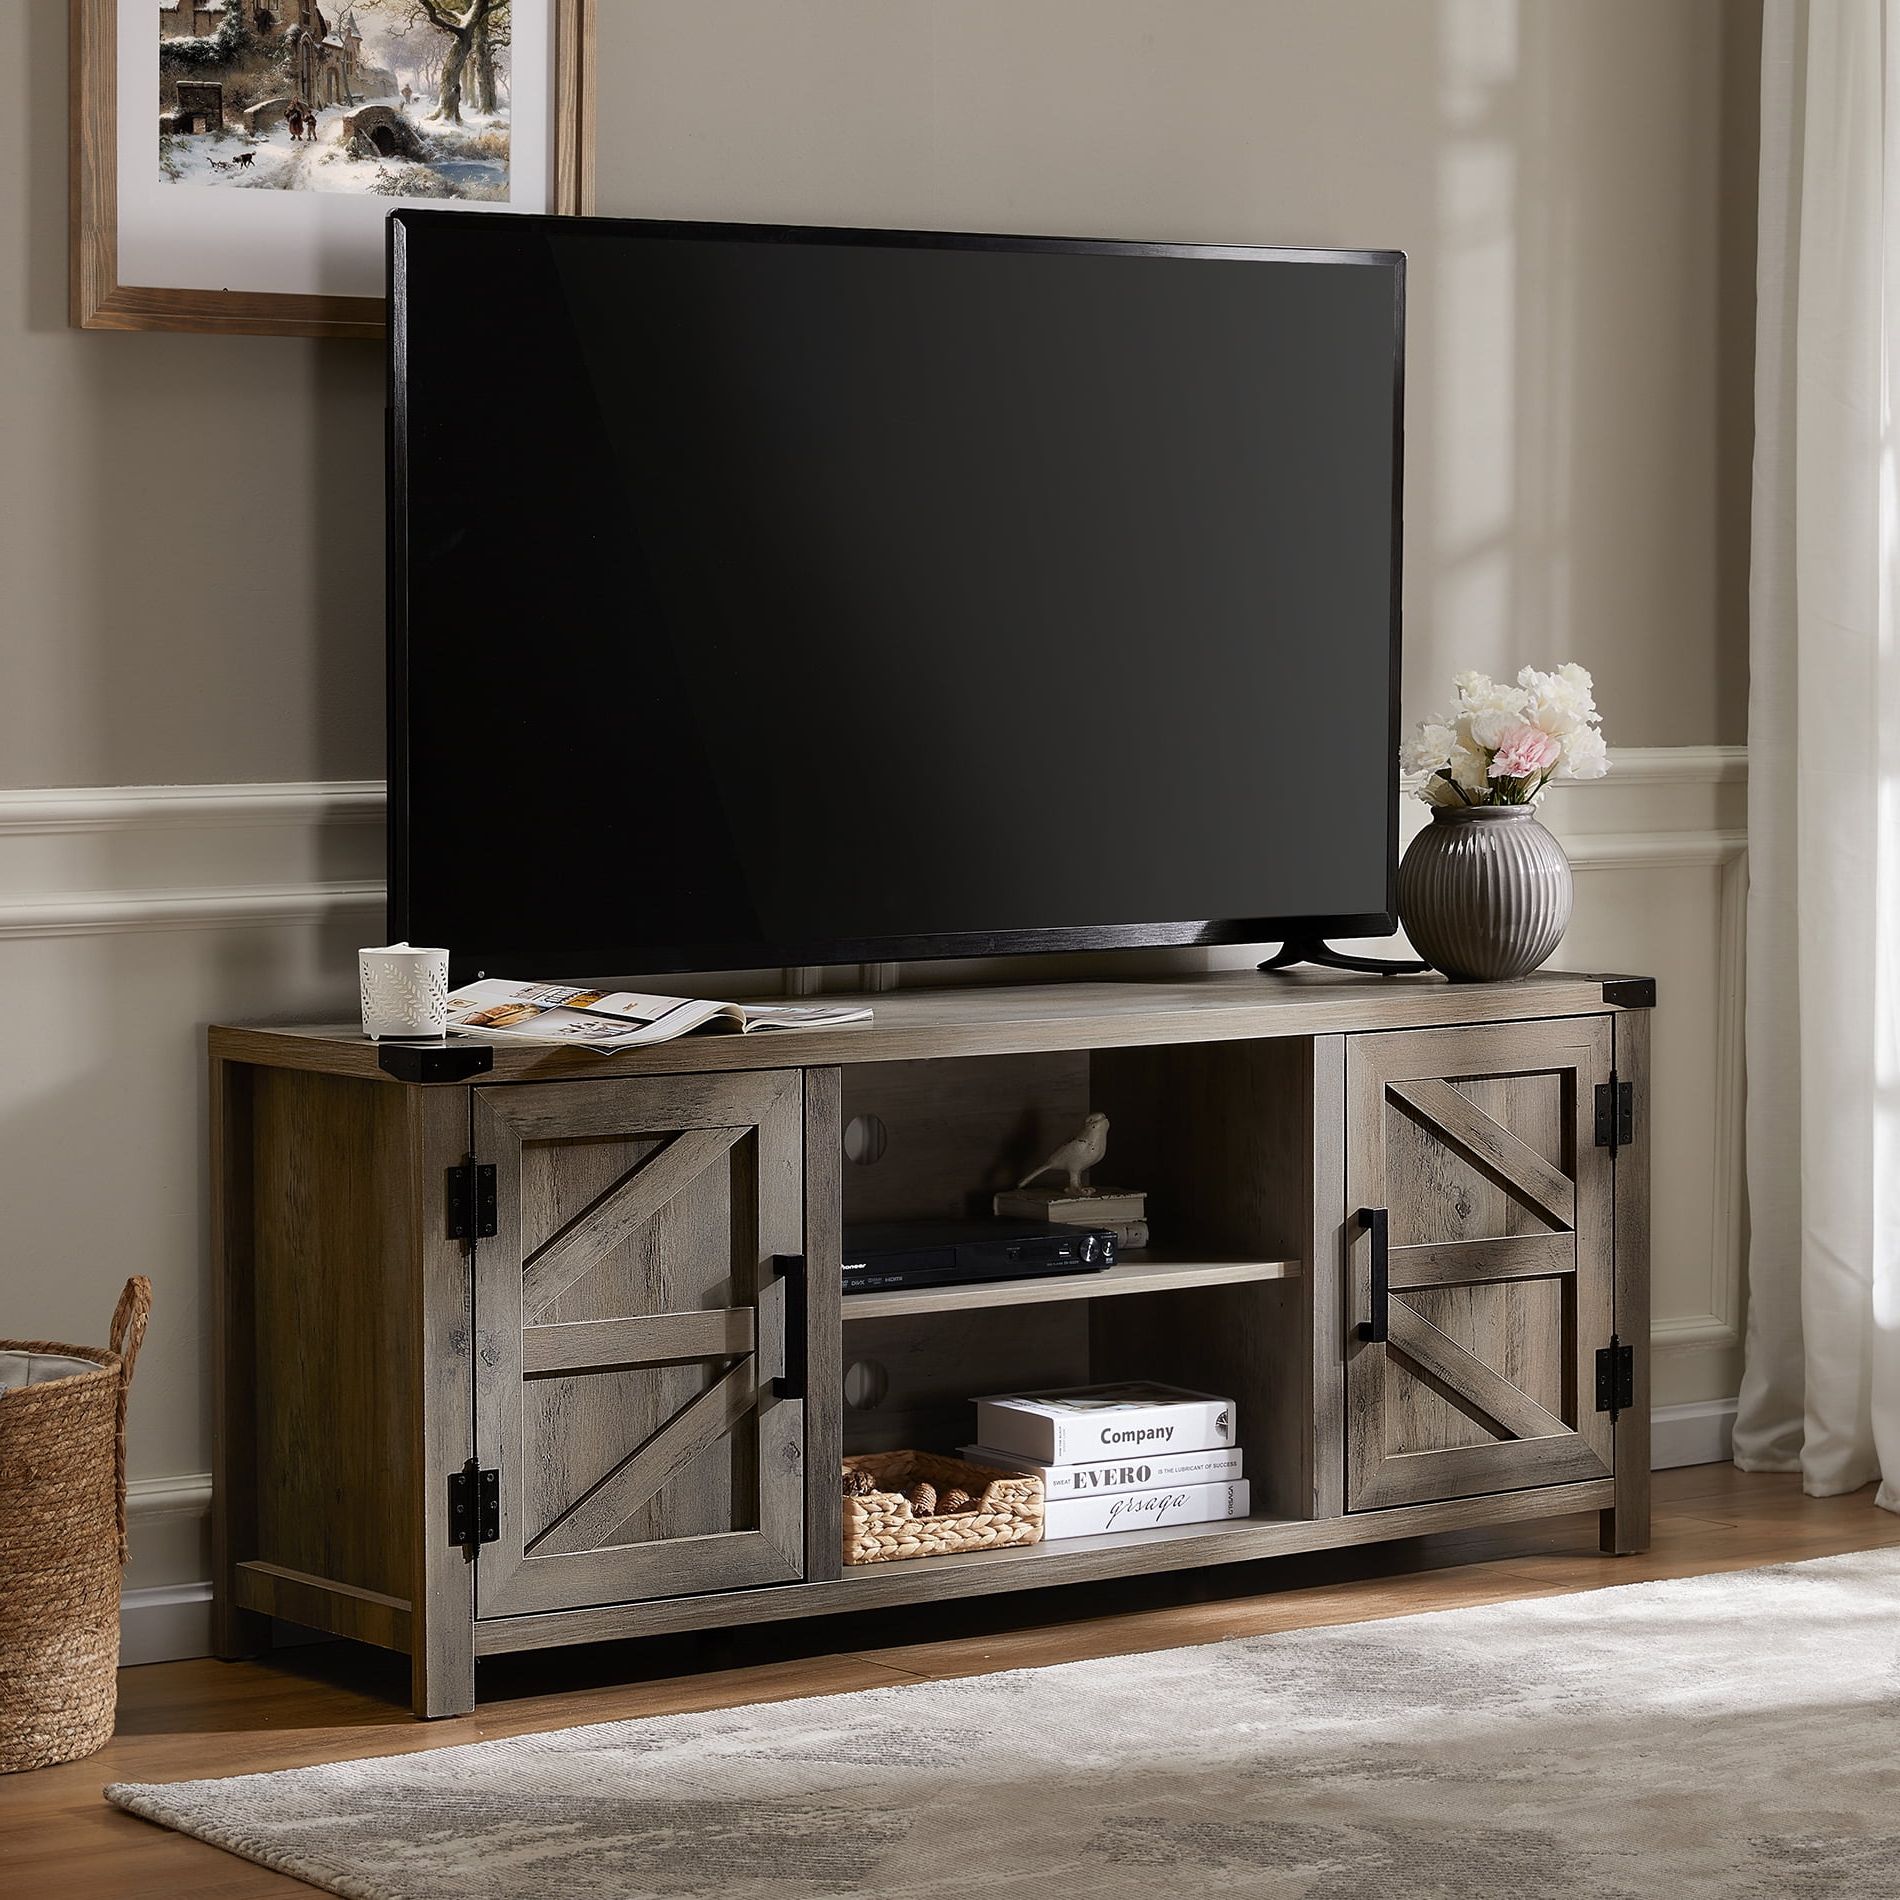 Favorite Buy Fitueyes Farmhouse Barn Door Wood Tv Stands For 70 Flat Screen Pertaining To Farmhouse Tv Stands For 70 Inch Tv (View 2 of 15)